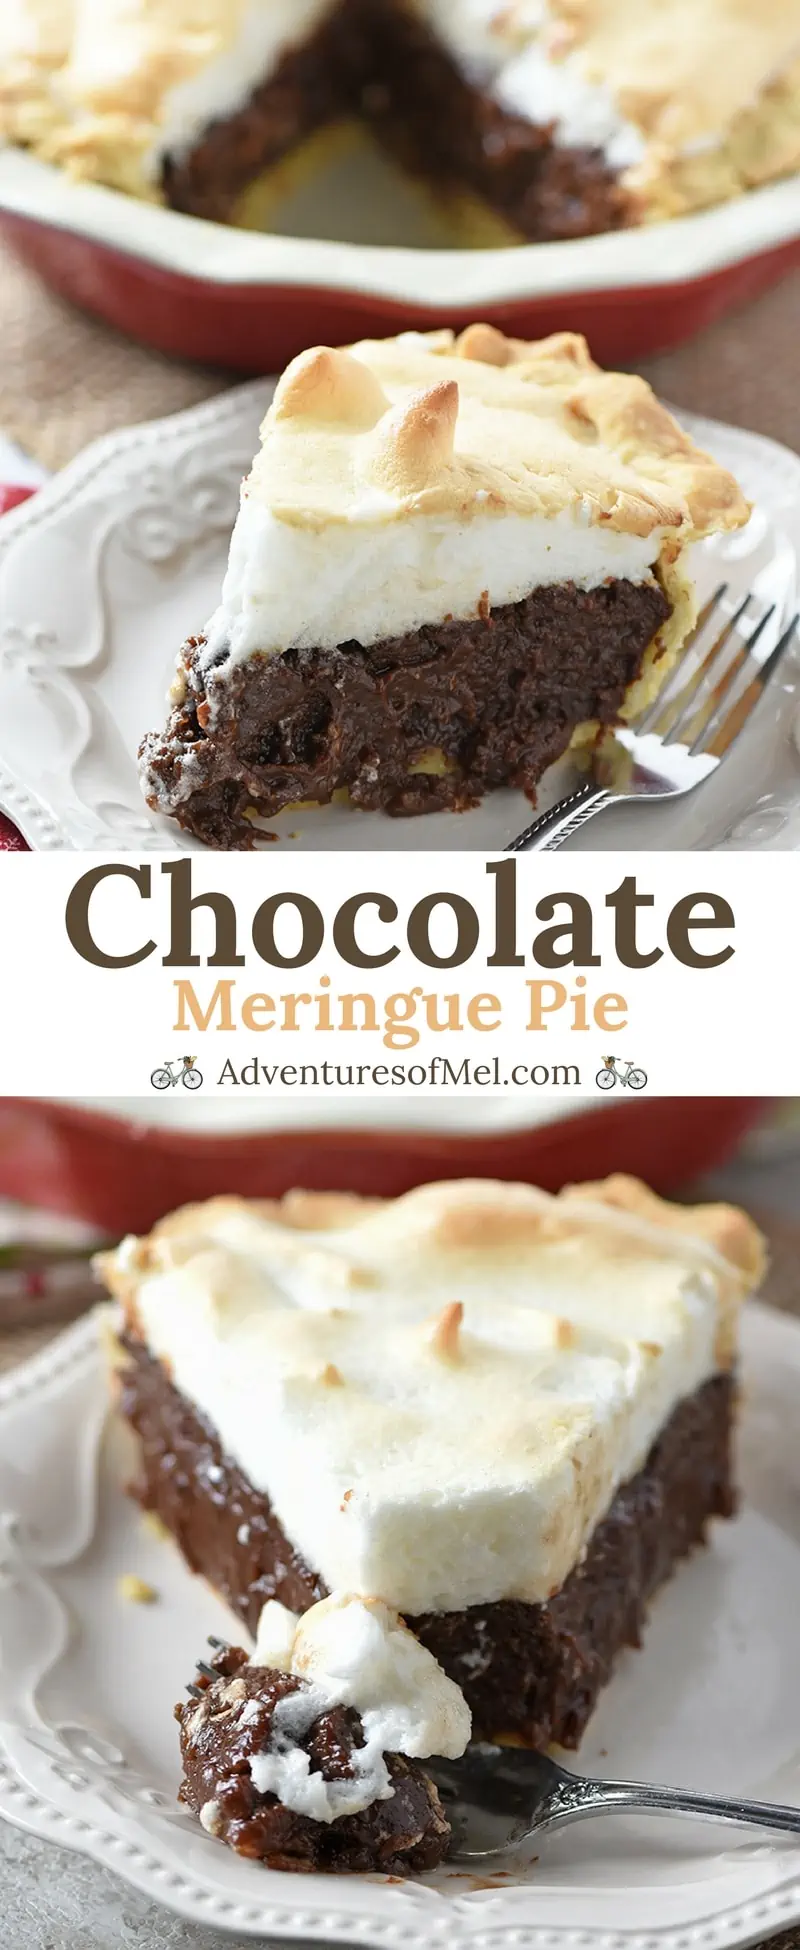 Chocolate Meringue Pie with a rich, creamy filling and fluffy homemade meringue. Delicious dessert recipe perfect for your inner chocolate lover!